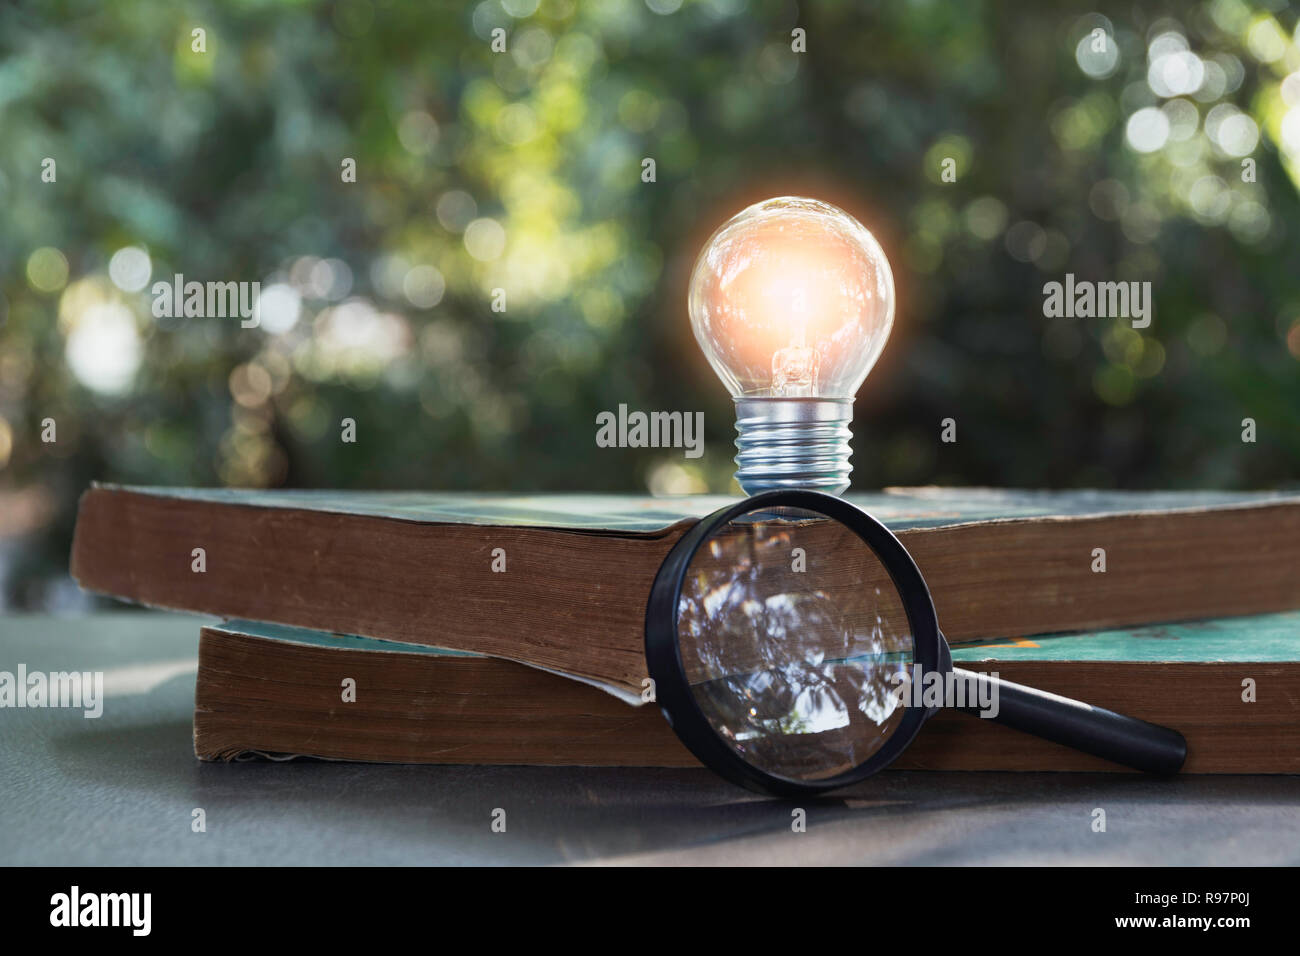 Light bulb and pile of book on table and copy space for insert text. Stock Photo